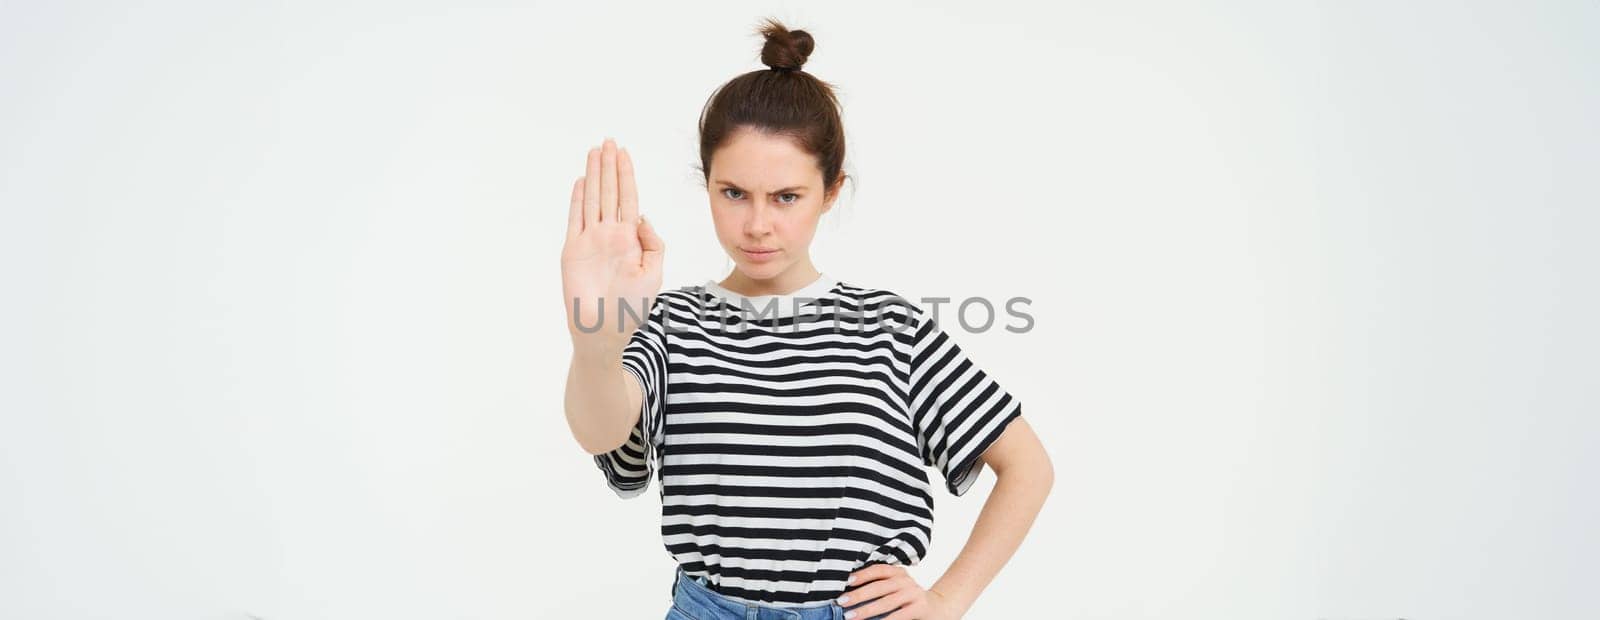 Image of woman frowning, showing one palm, stop gesture, disapprove and reject something, makes prohibit gesture, standing over white background.